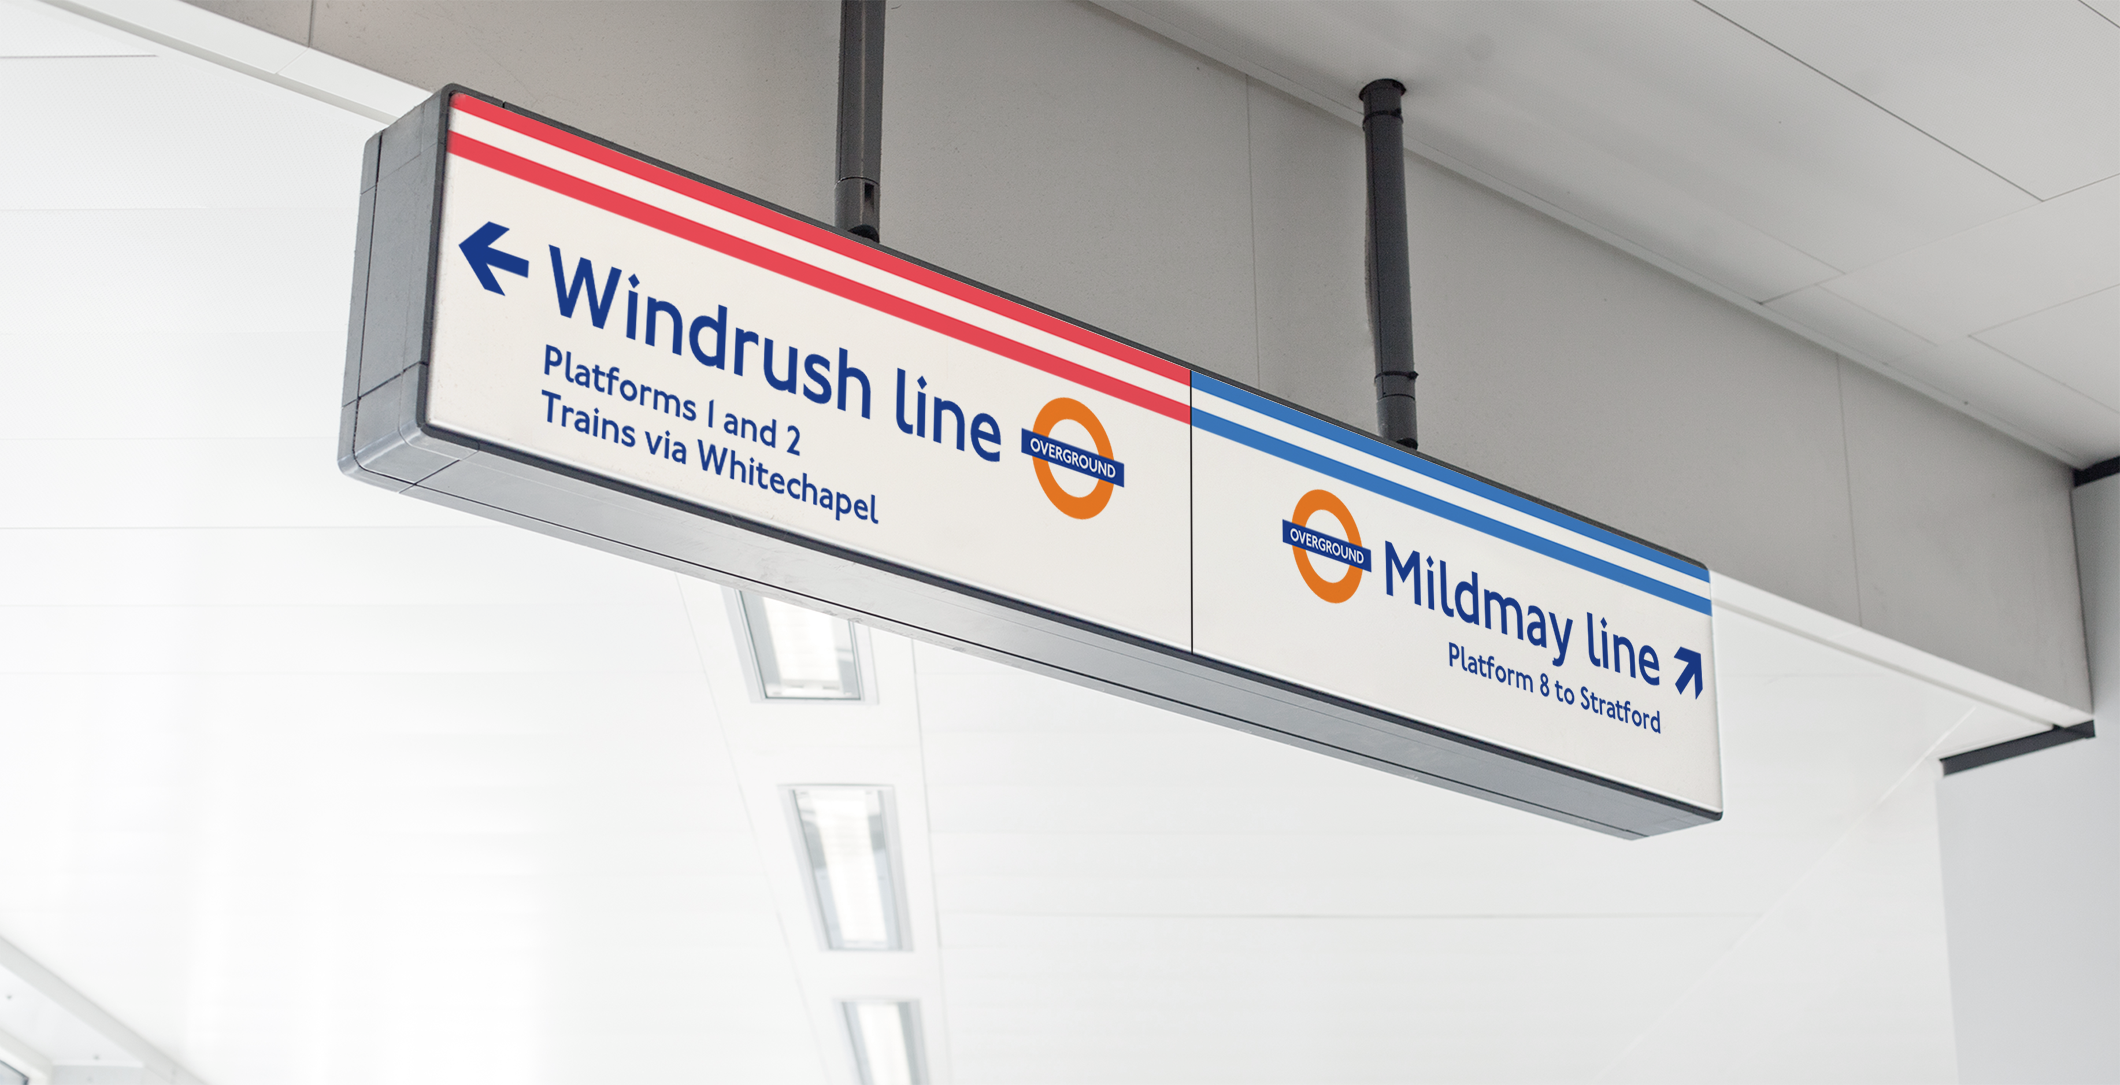 A photography of a piece of signage from a London Overground station: a wide horizontal sign held by a metal box hanging from a ceiling. The sign has two sections, showing directions for two different London Overground lines (Windrush and Mildmay). The sign incudes dual lines in the respective service colours and London Overground logos next to the line names.